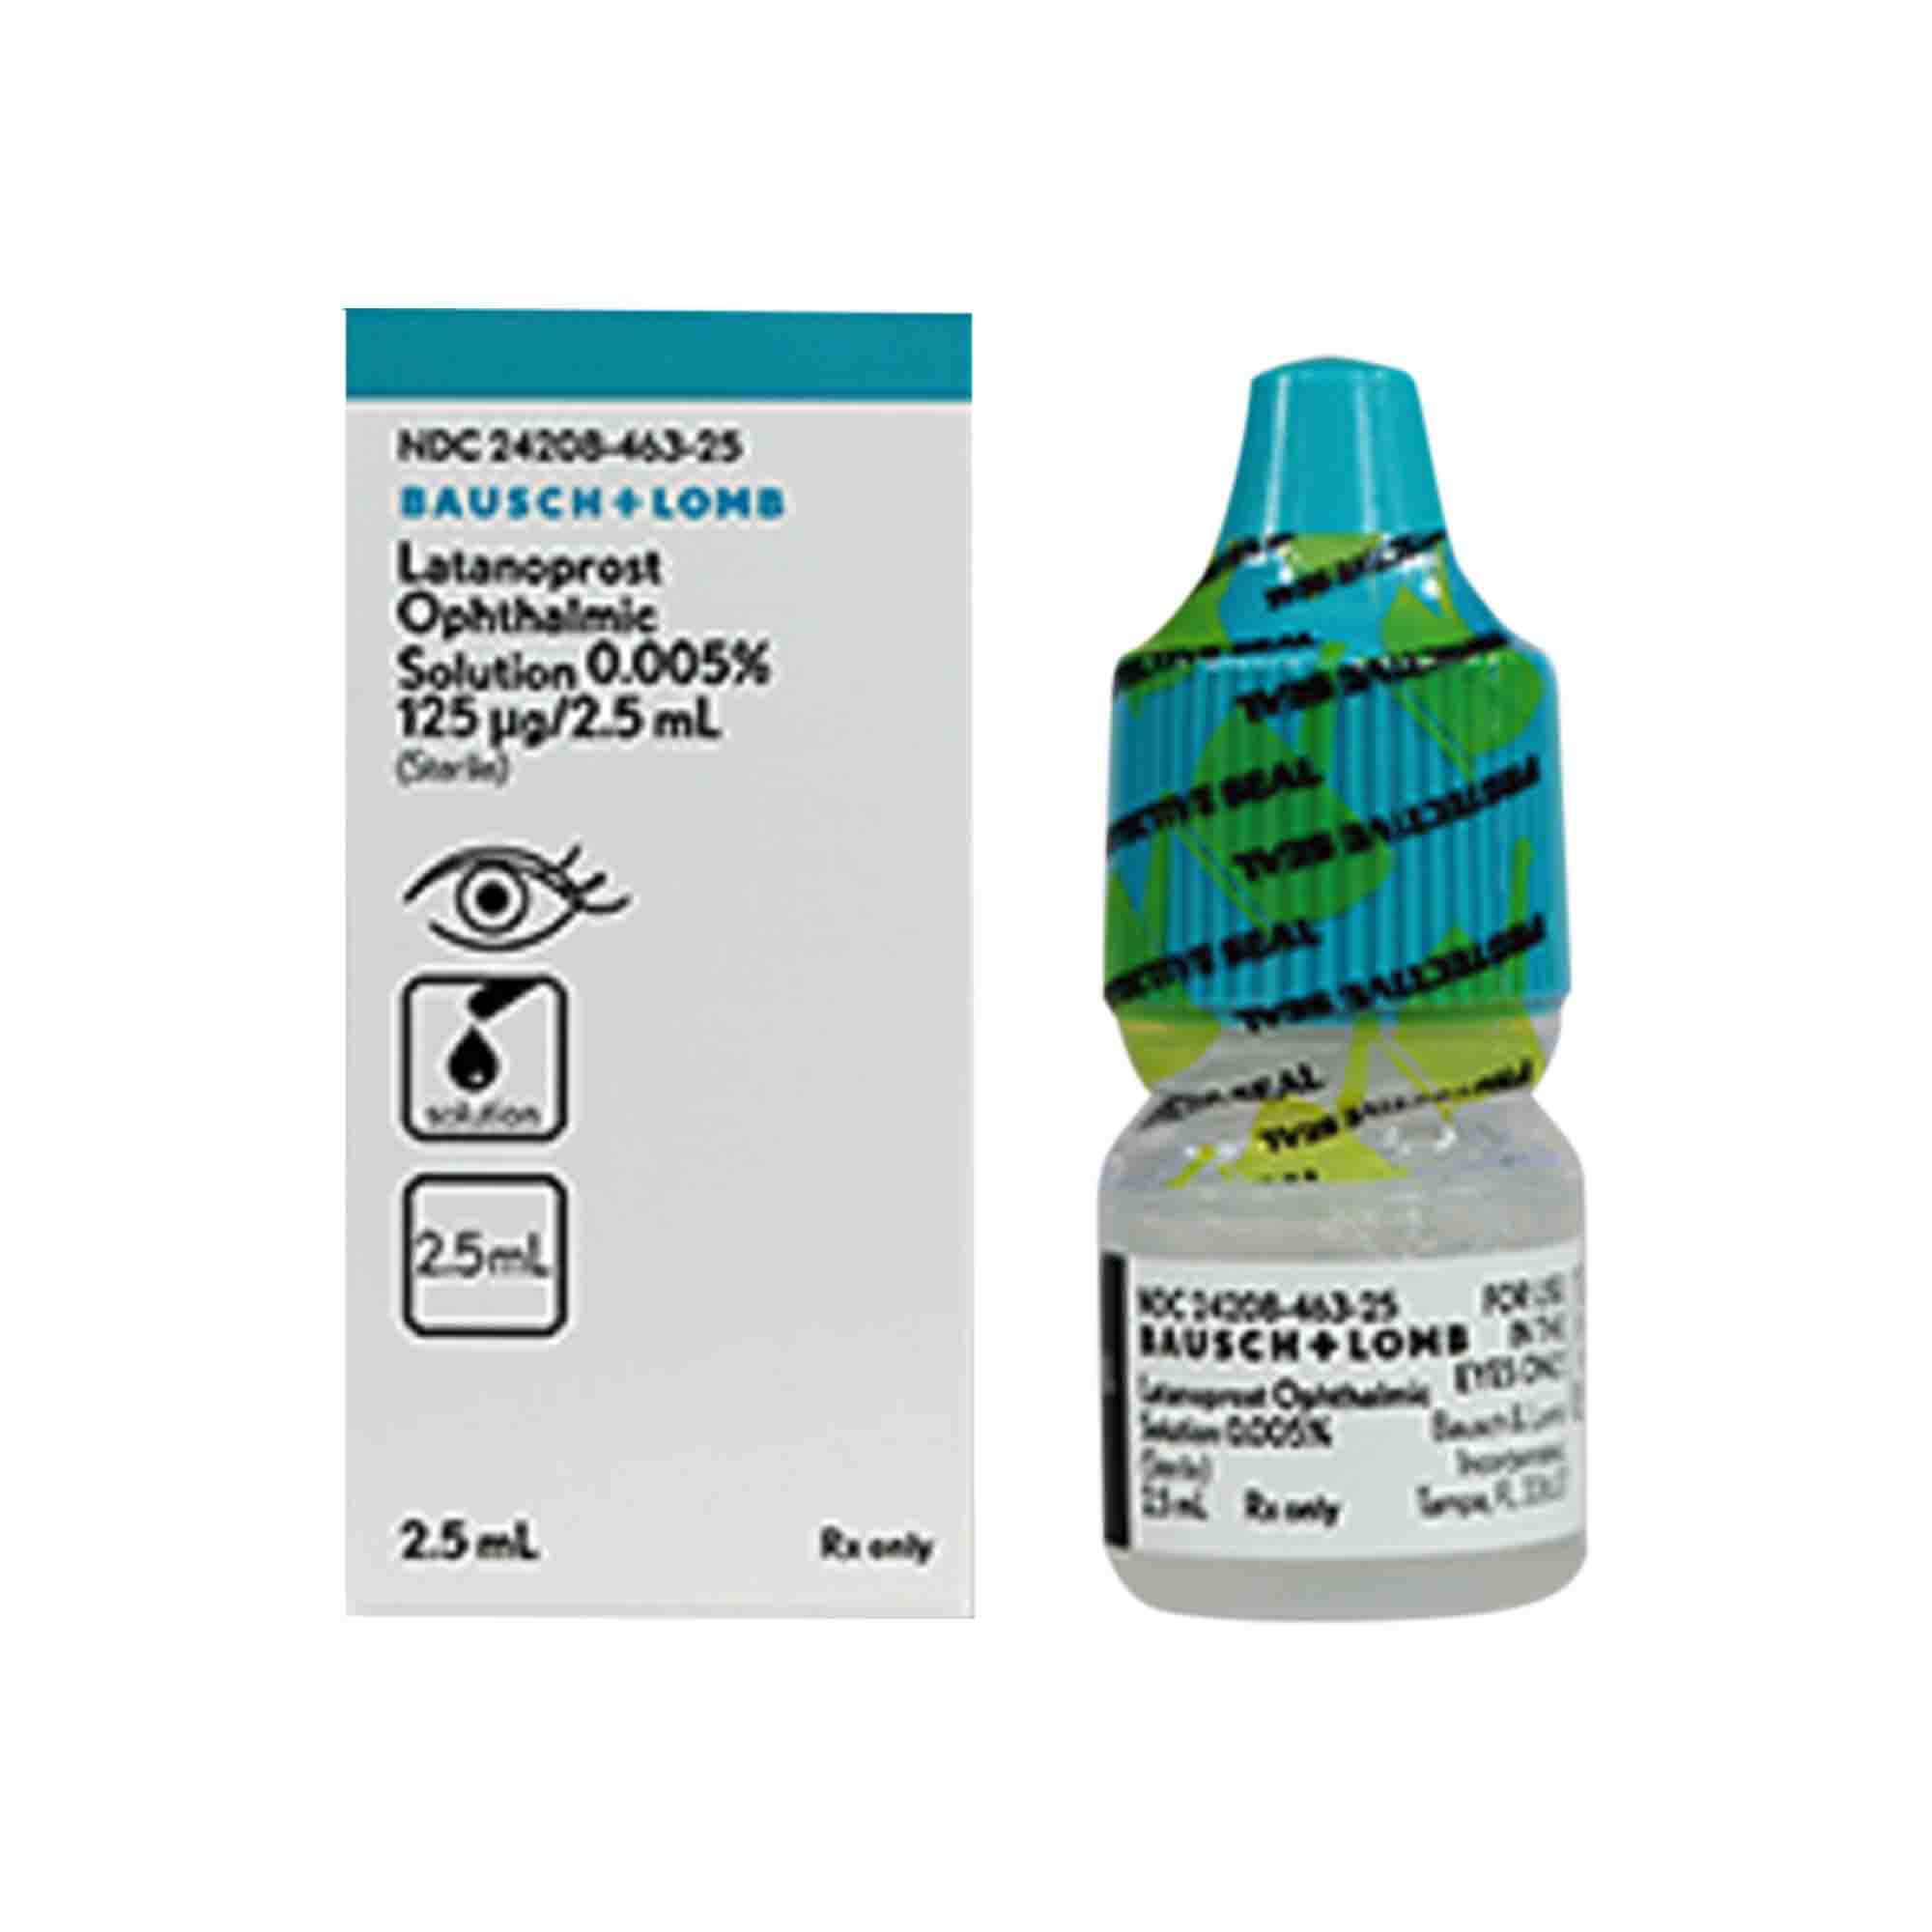 Bausch & Lomb Latanoprost Opthalmic Solution for Pets 0.005% 2.5ml